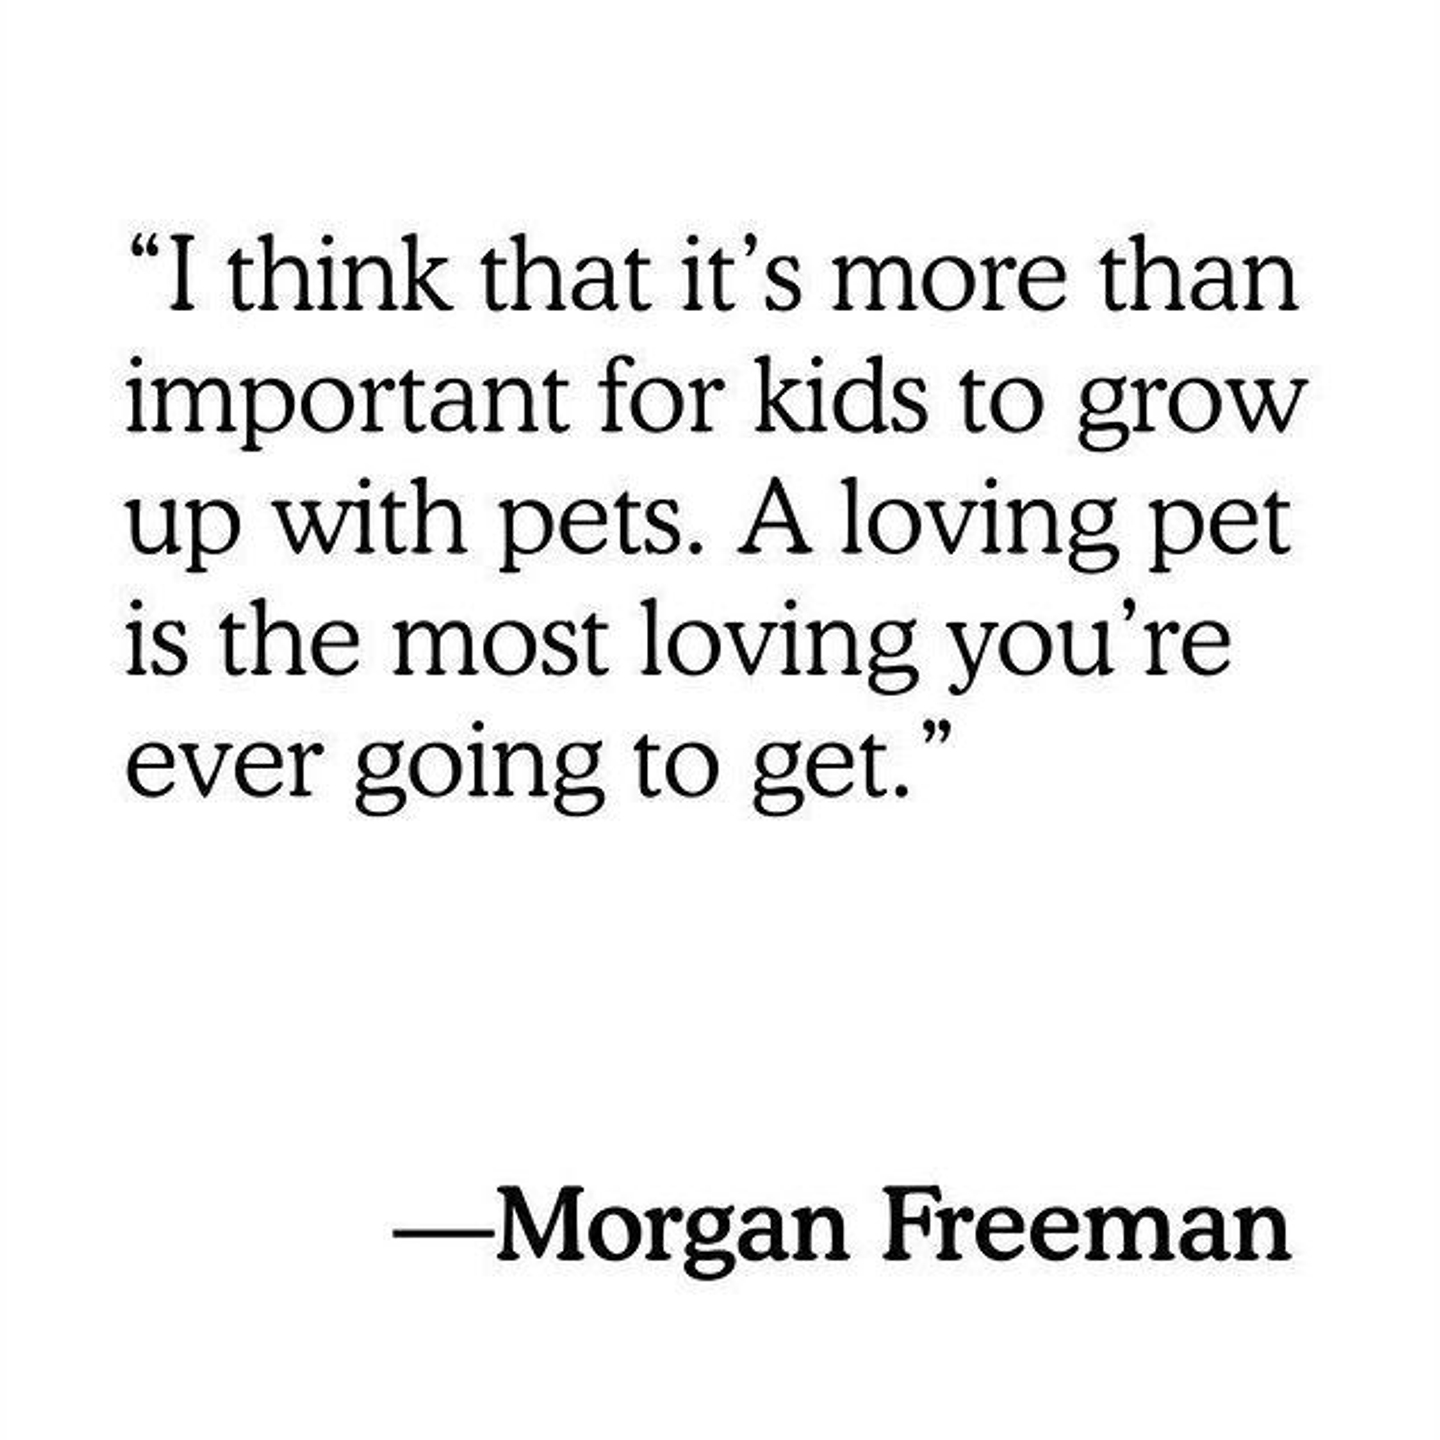 Morgan Freeman Quote: I think that it’s more than important for kids to grow up with pets. A loving pet is the most loving you’re ever going to get. 